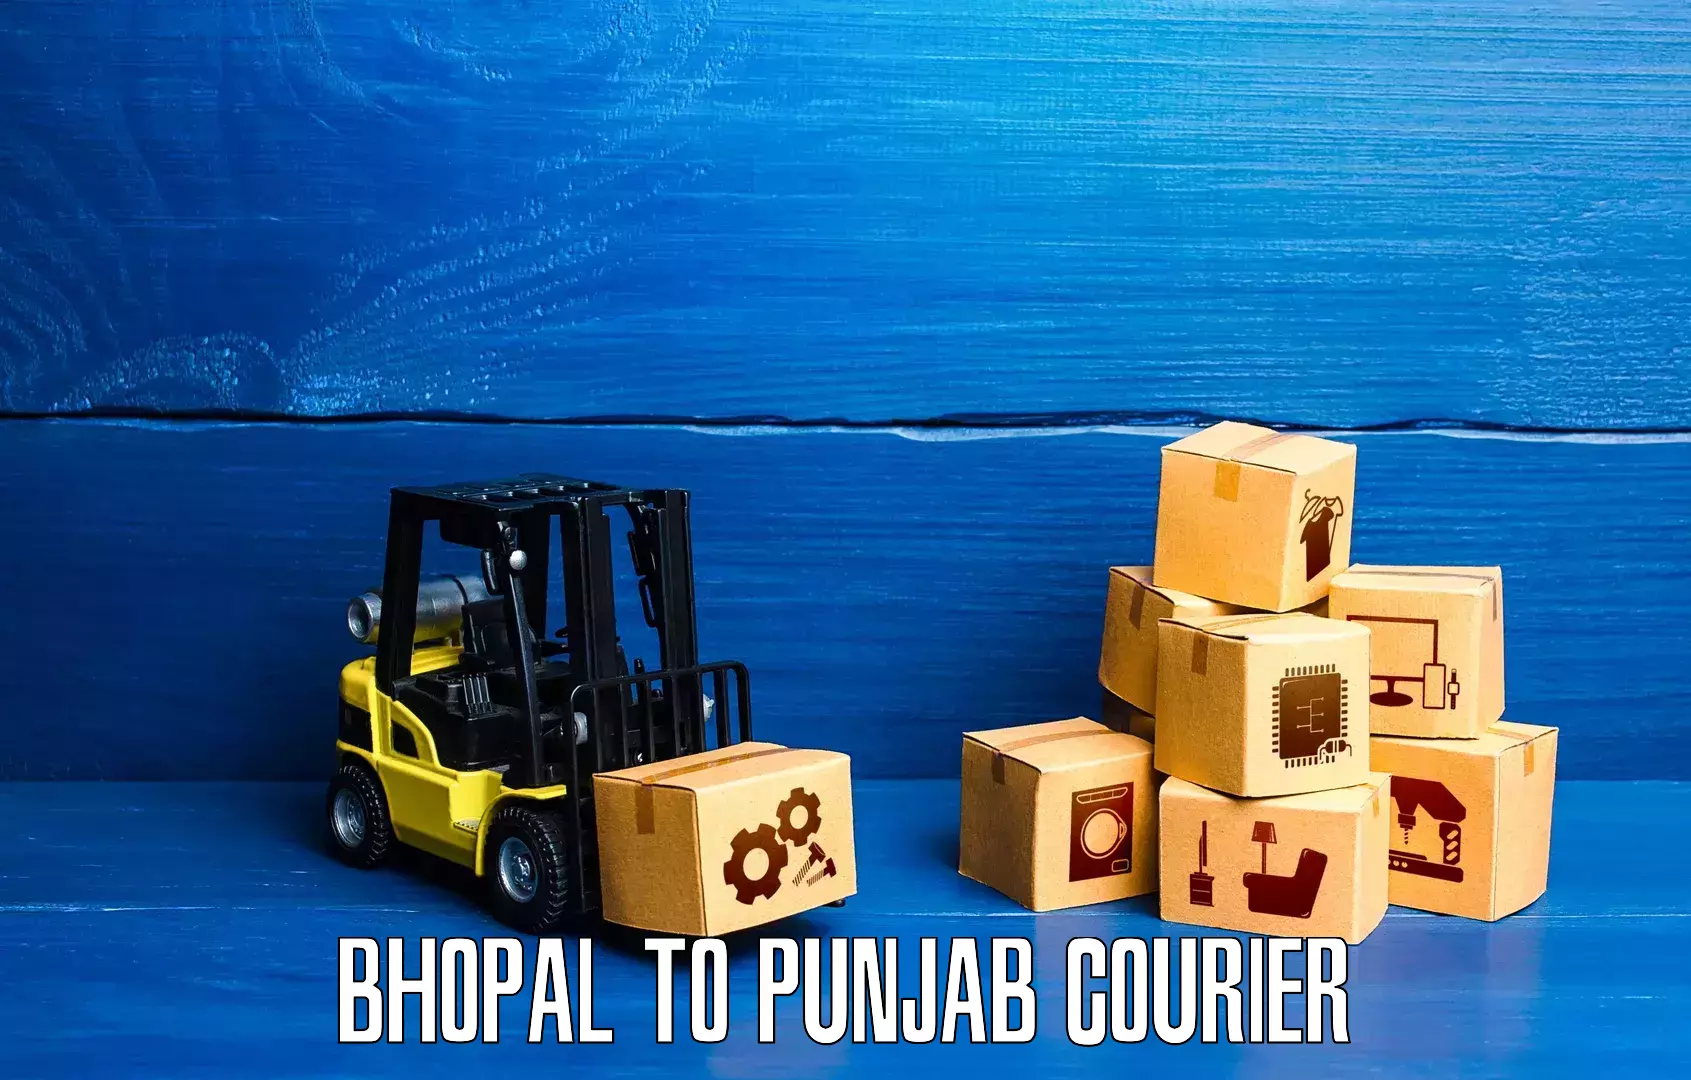 Nationwide courier service Bhopal to Punjab